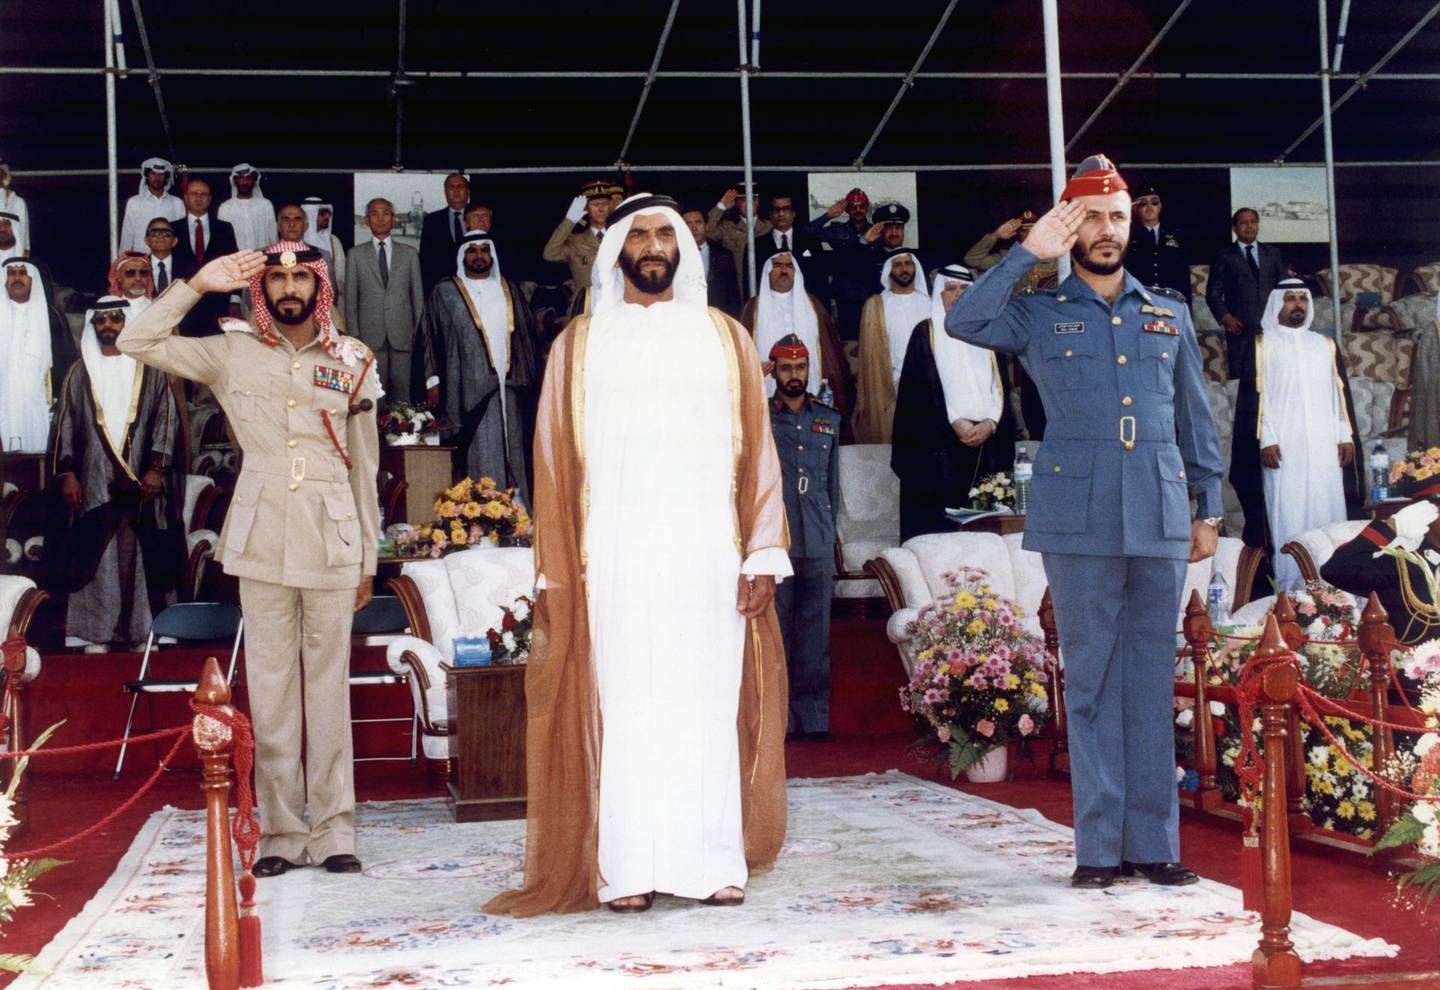 Sheikh Zayed Bin Sultan Al Nahyan attending the graduation ceremony of Air Academy students at Al Dhafra base, 1987 
National Archives images supplied by the Ministry of Presidential Affairs to mark the 50th anniverary of Sheikh Zayed Bin Sultan Al Nahyan becaming the Ruler of Abu Dhabi. *** Local Caption ***  69.jpg